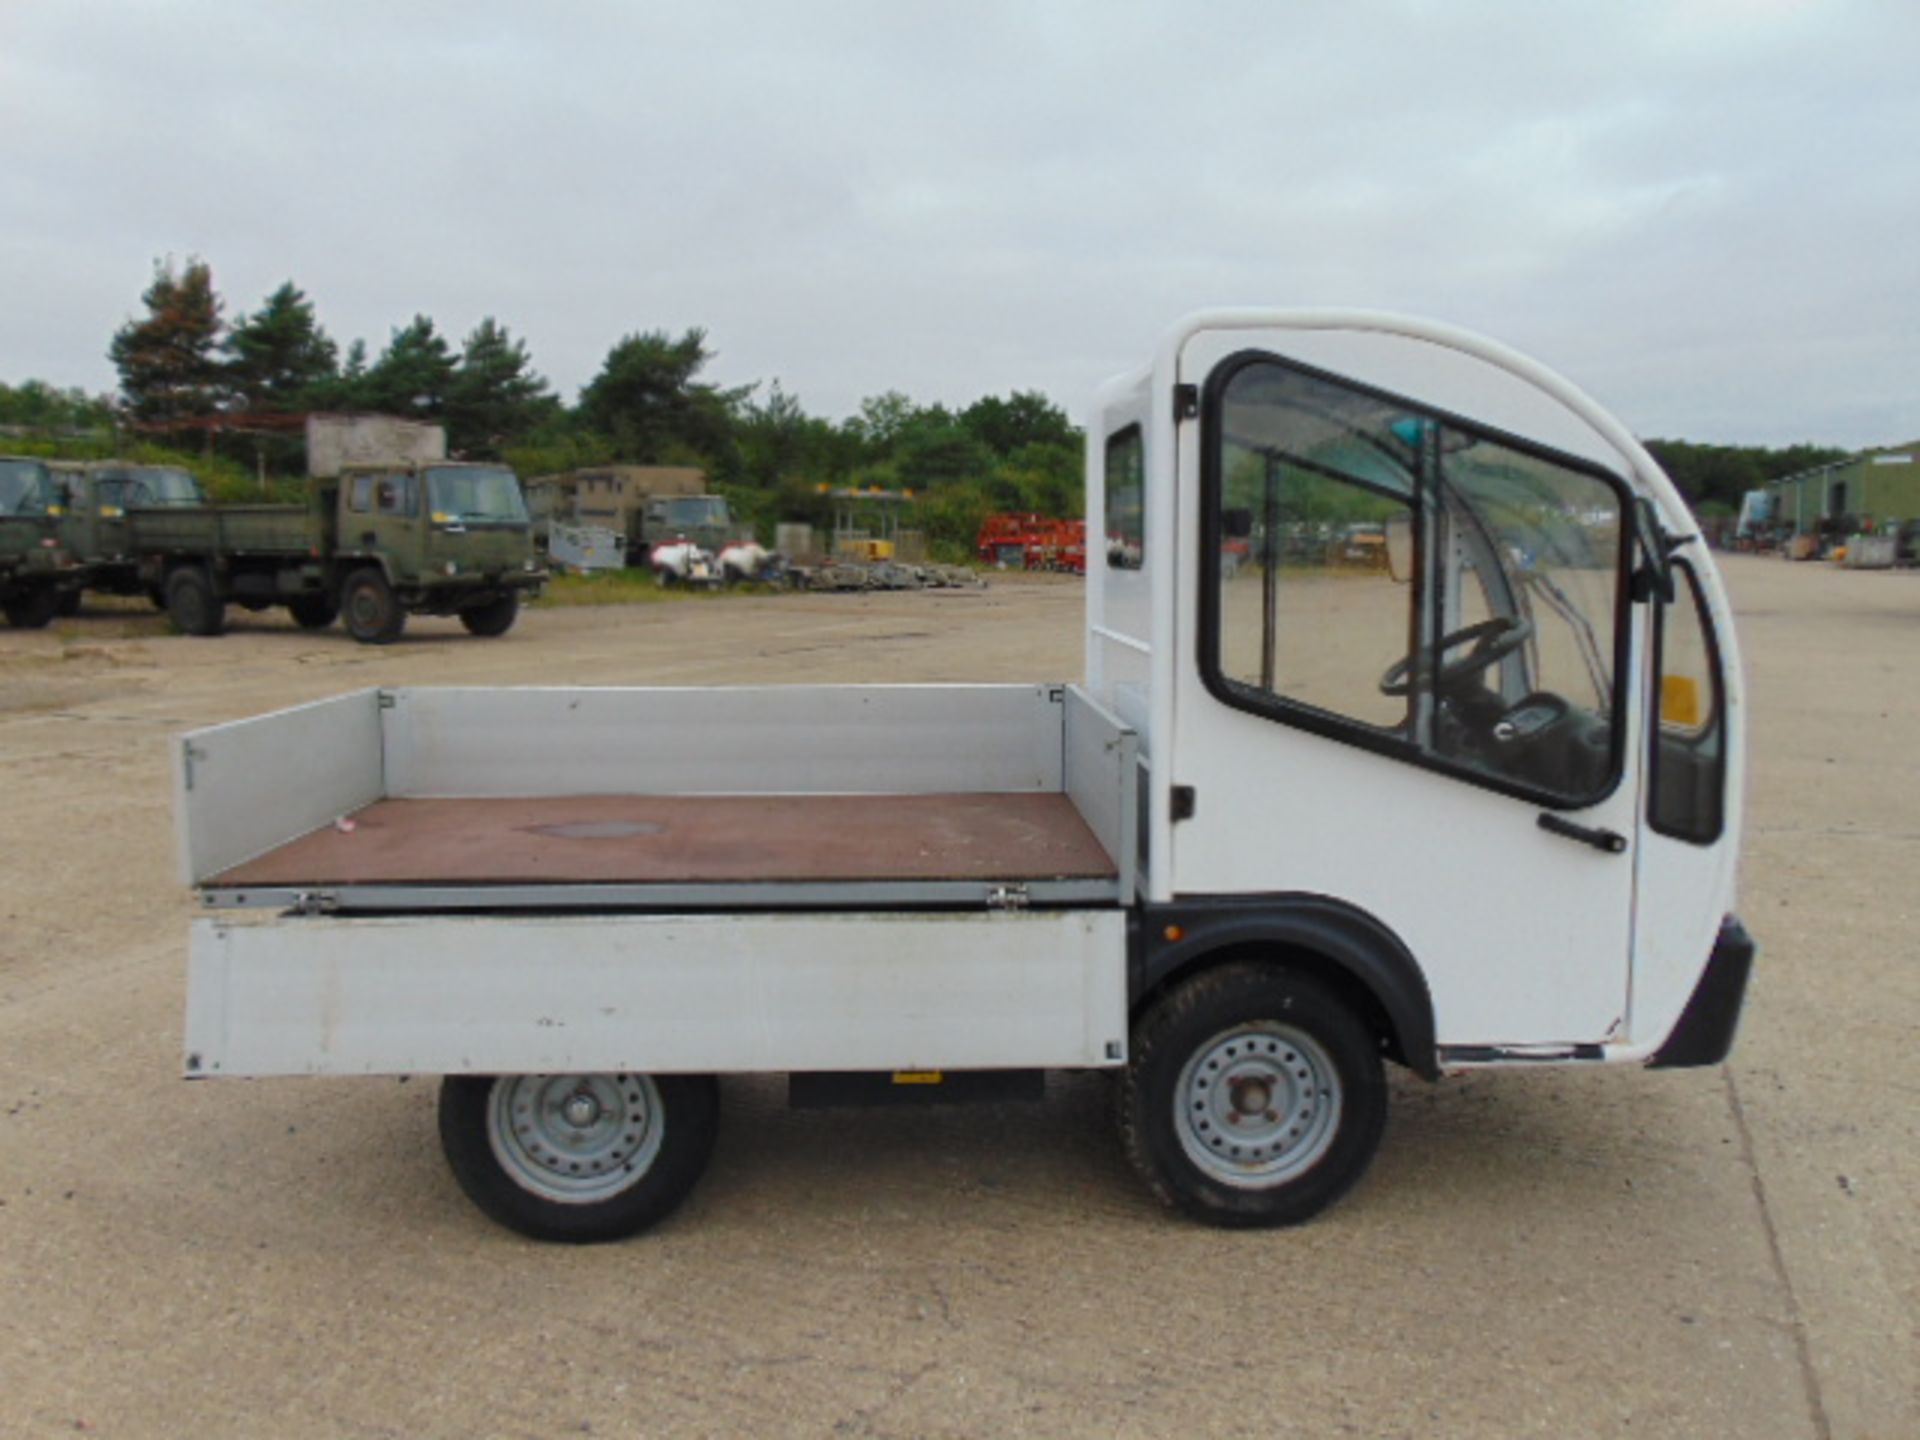 Goupil 2WD Electric Dropside Utility Vehicle - Image 9 of 14